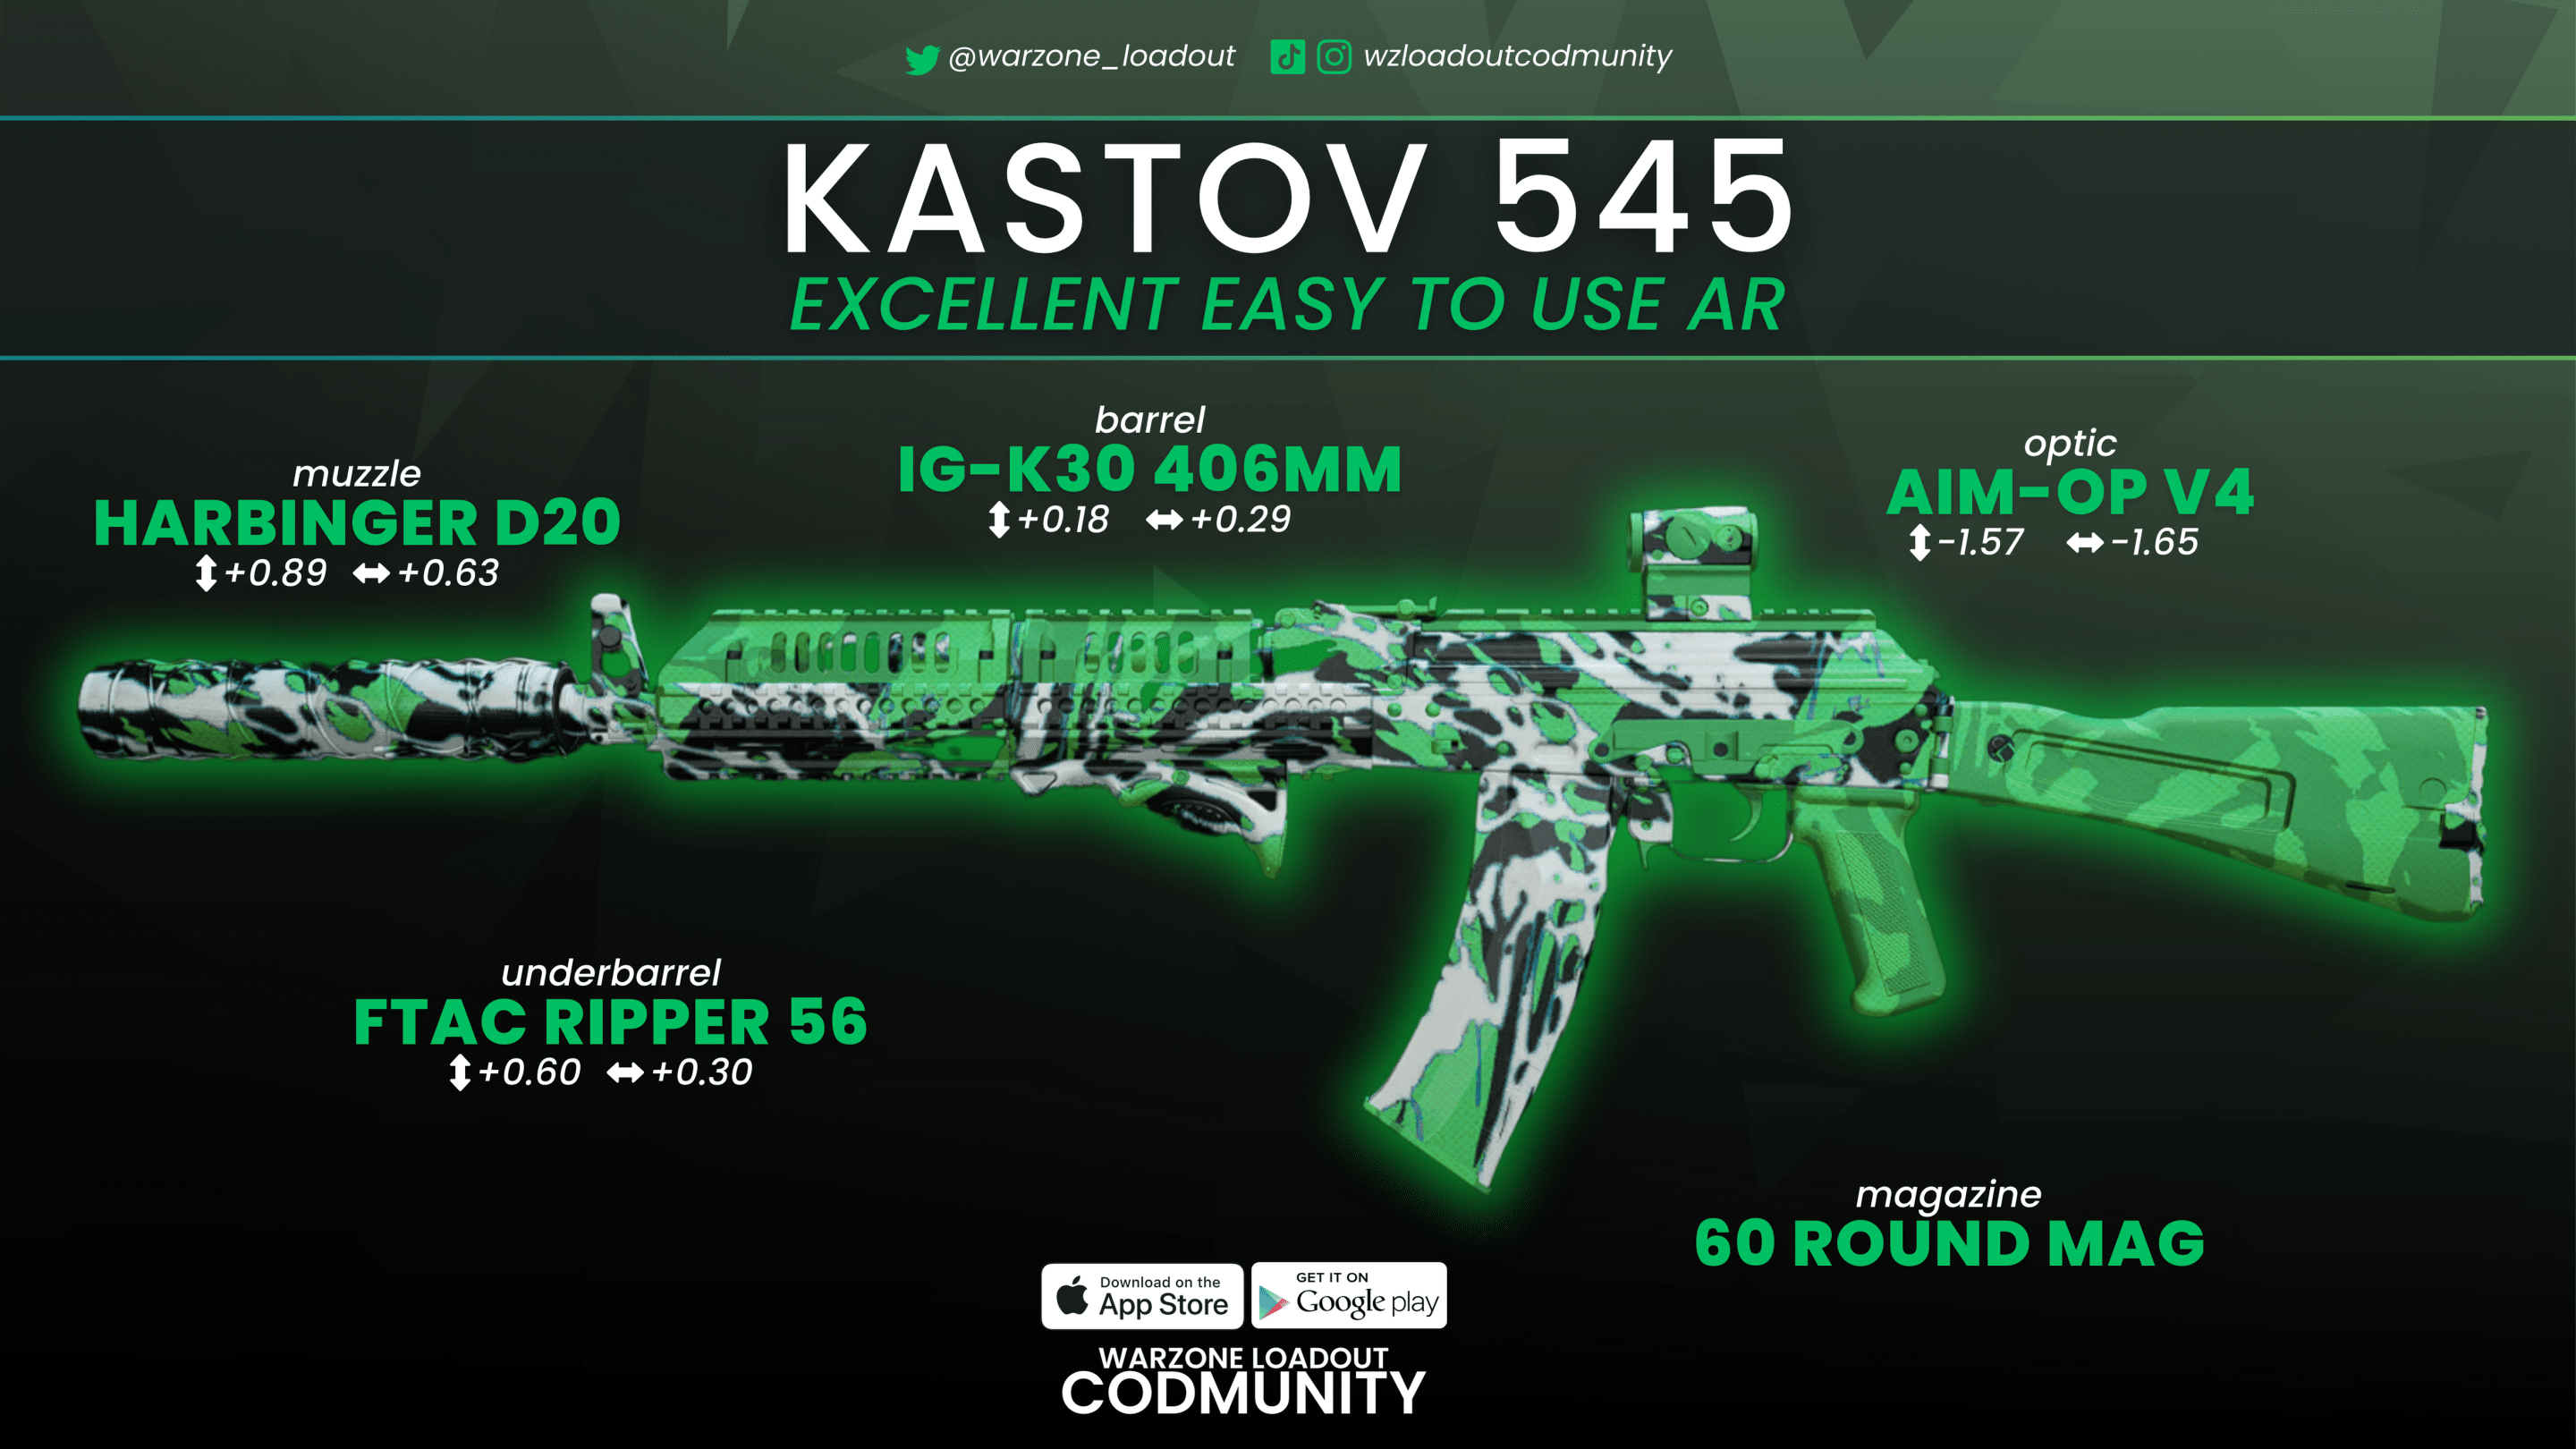 Best Kastov 545 Warzone Loadout - Excellent easy to use assault rifle!